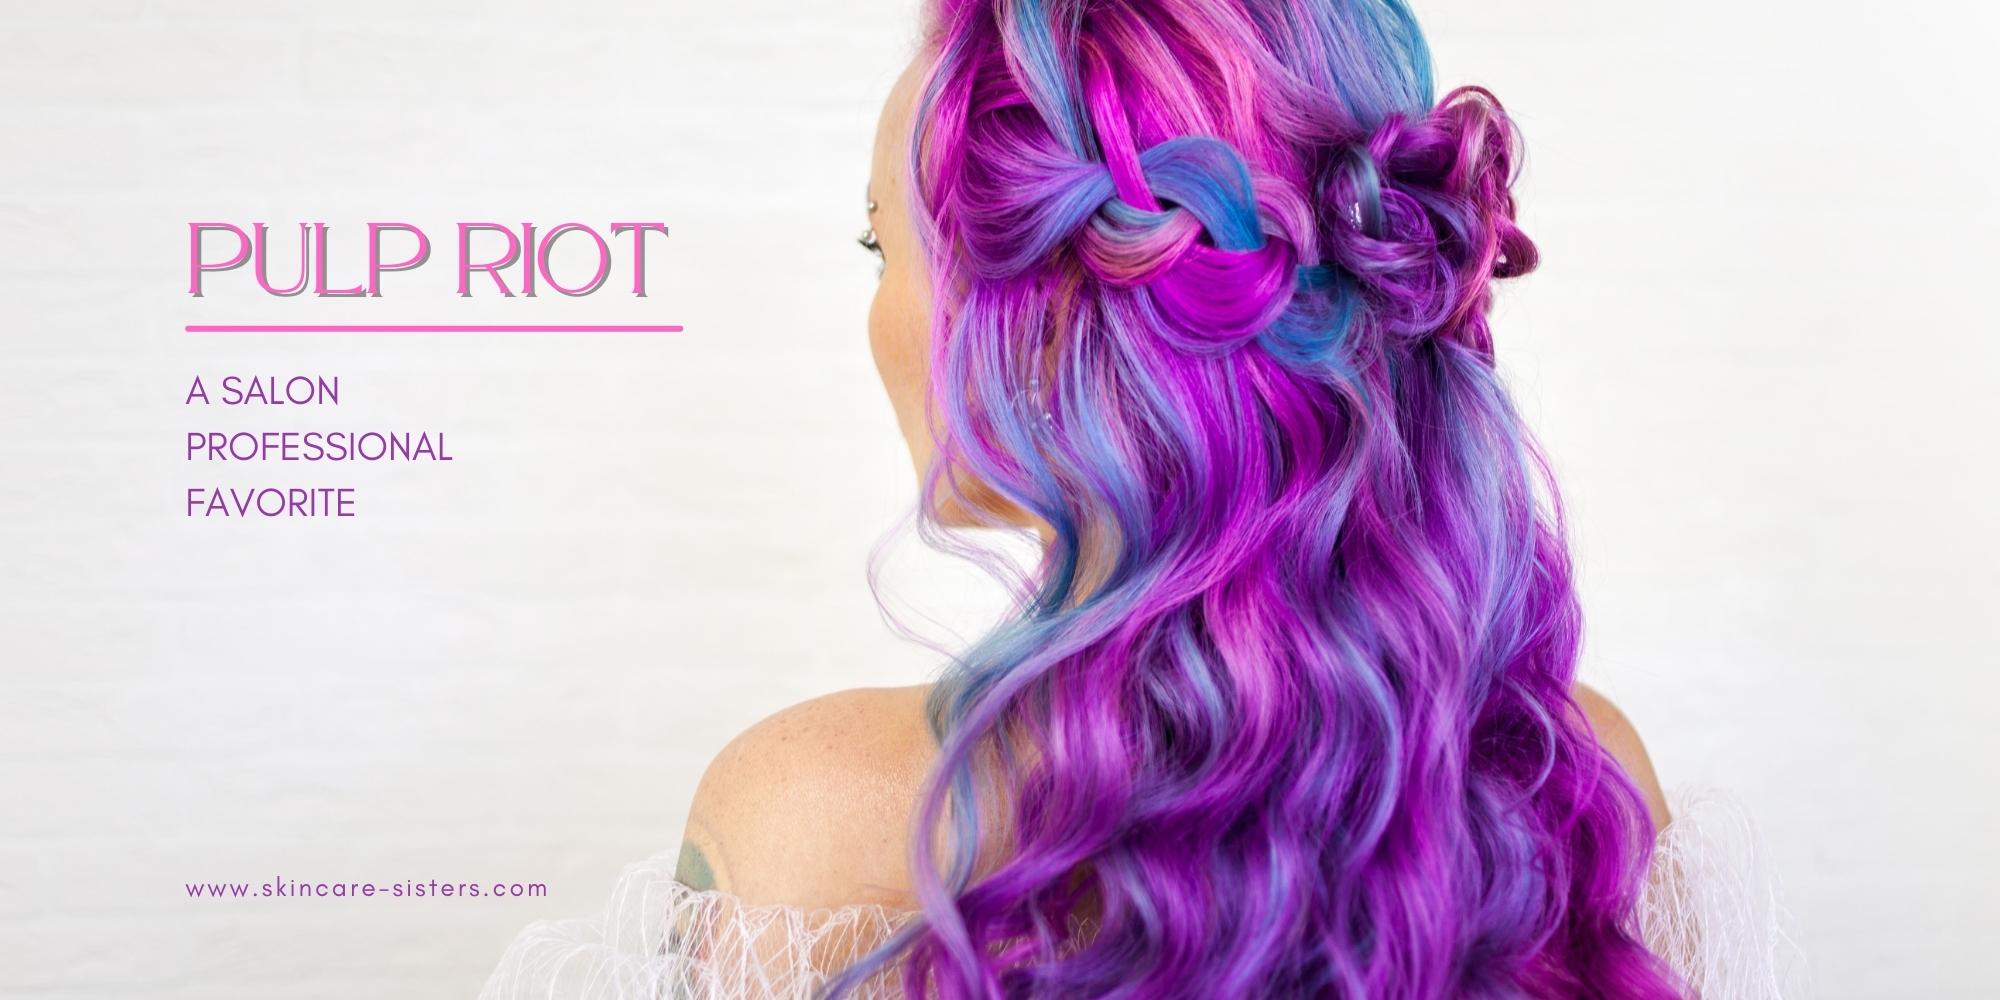 Why Pulp Riot Hair Dye is a Salon Professional Favorite – Skincare Sisters